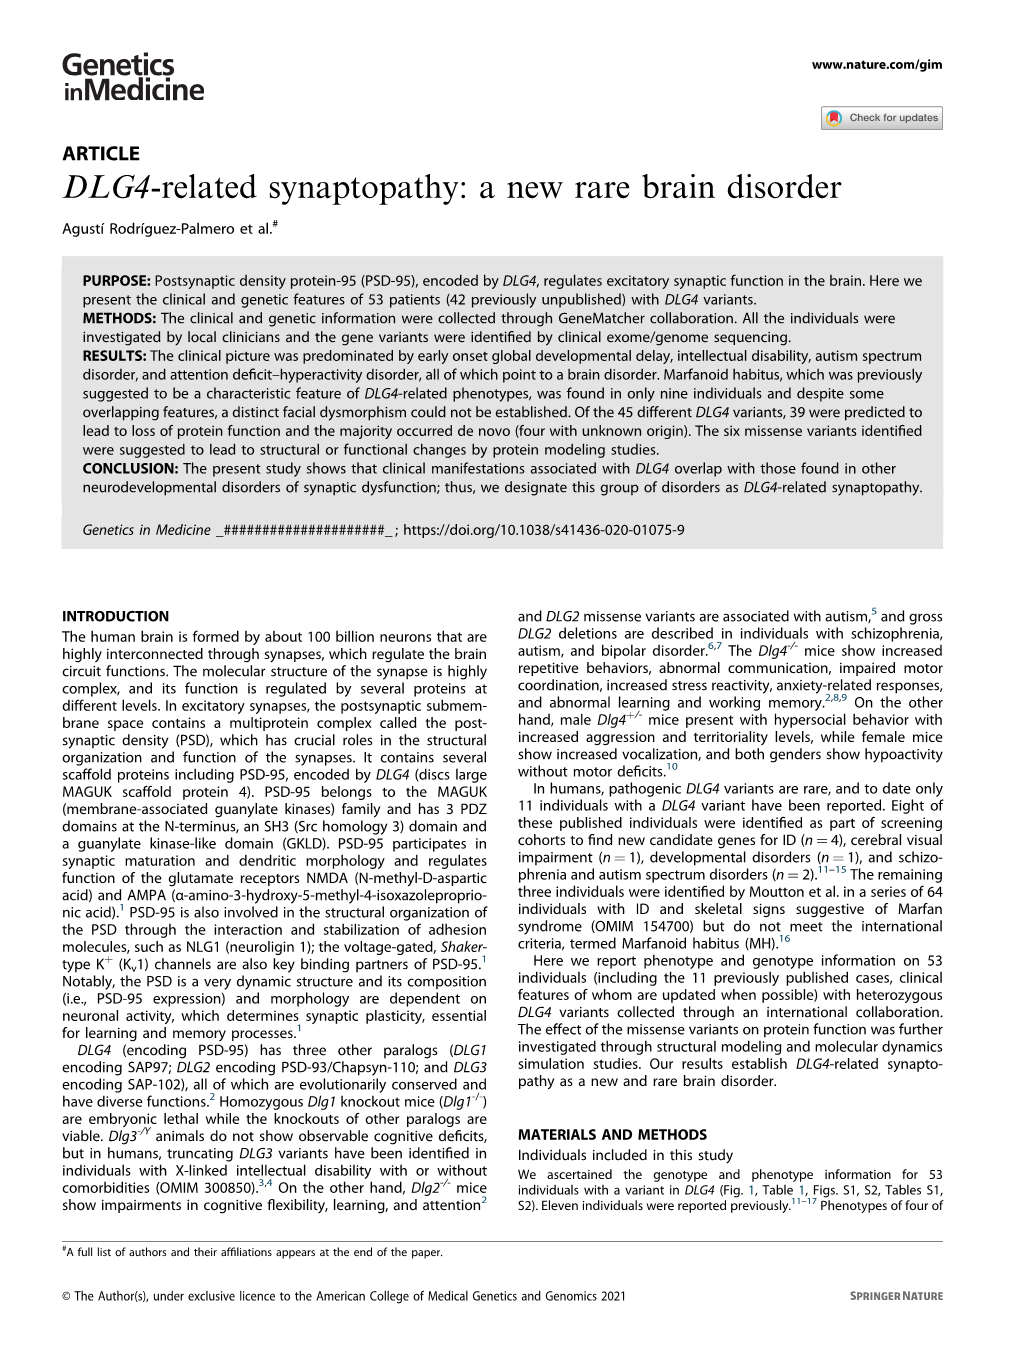 DLG4-Related Synaptopathy: a New Rare Brain Disorder